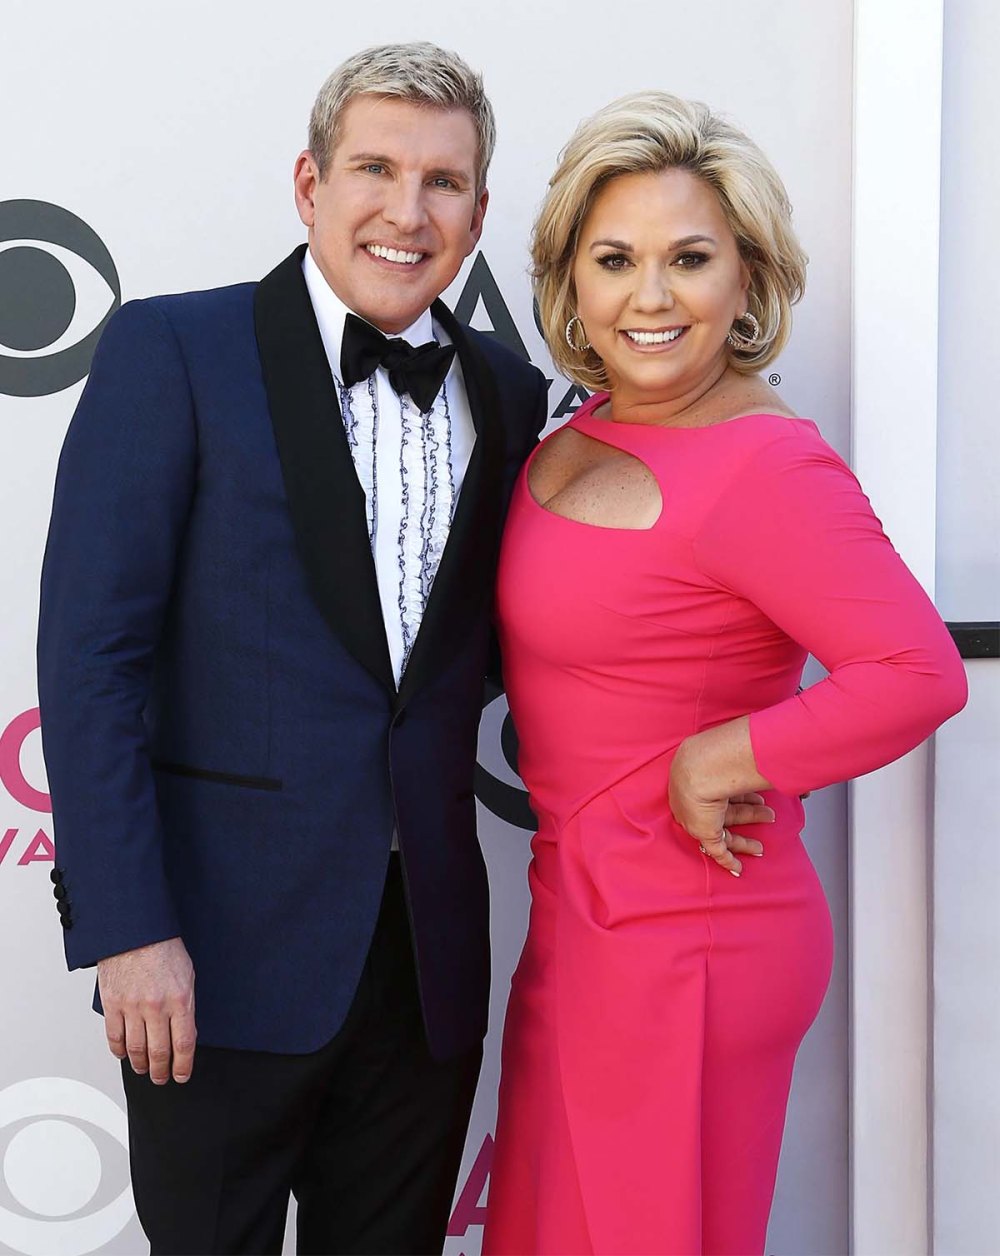 Todd, Julie Chrisley Got Into Fight About His 'Lies' Before Prison Sentence